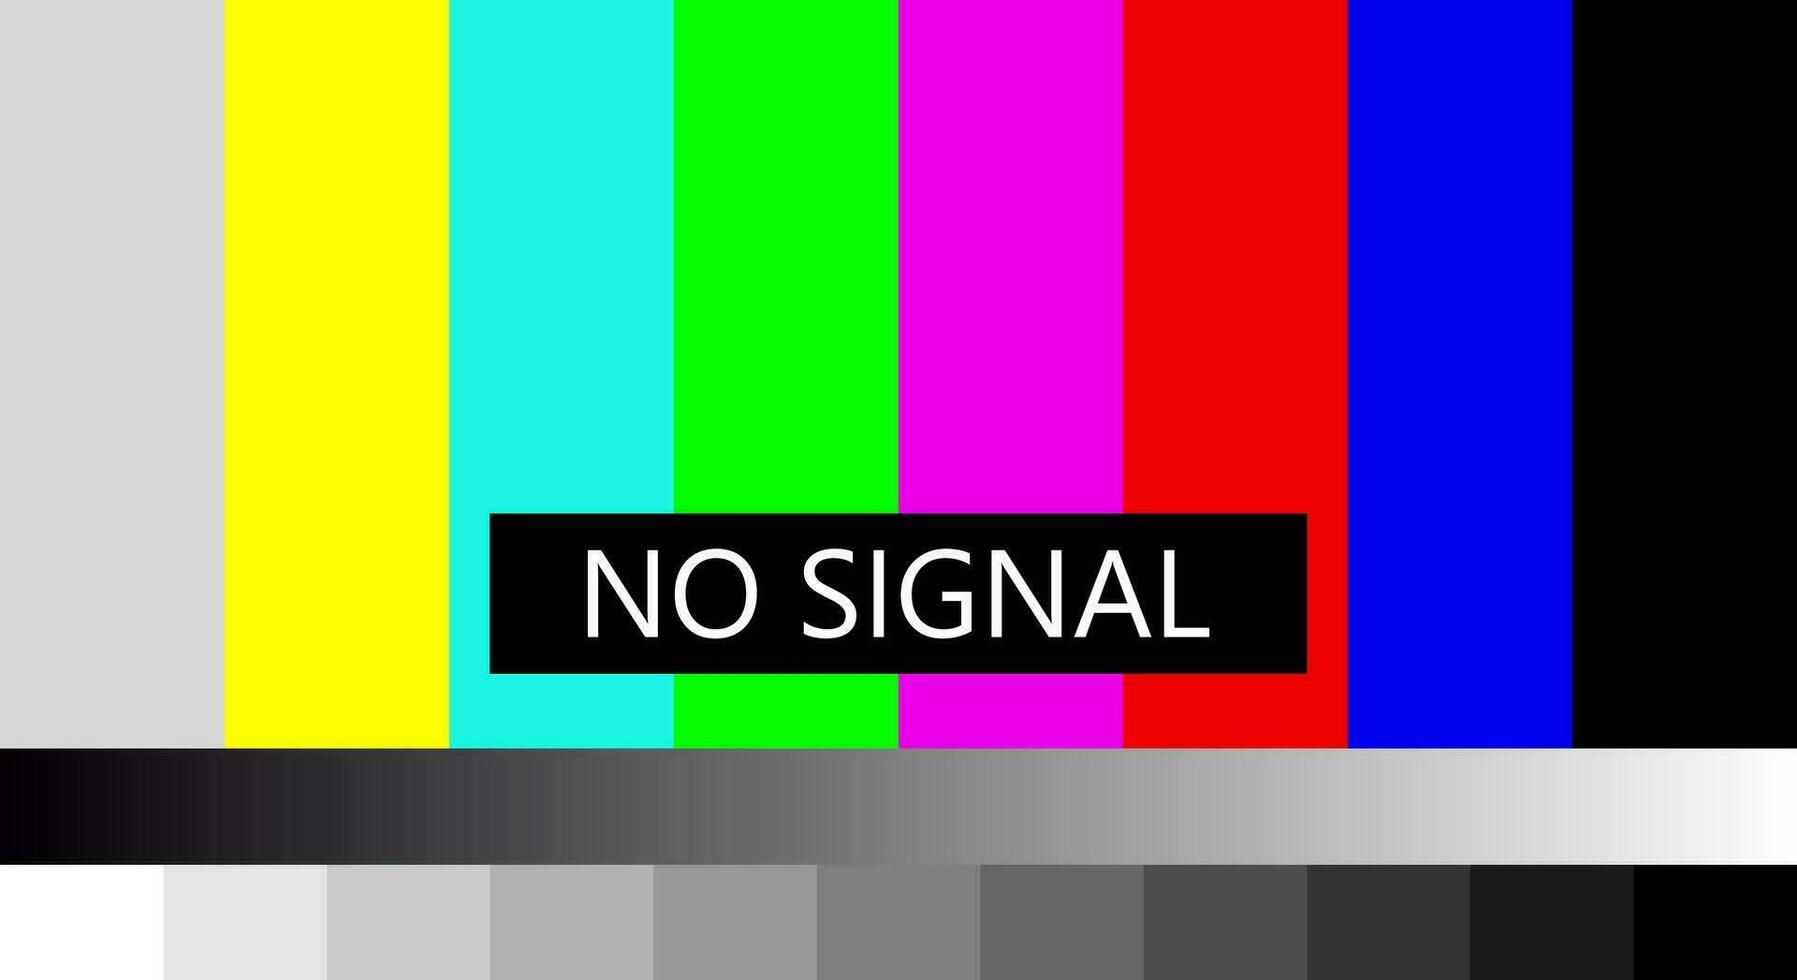 No TV signal. Not getting a signal symbol, screen displays color bars pattern error message, problem with the connection. 4k, full hd resolutions. Vector illustration.